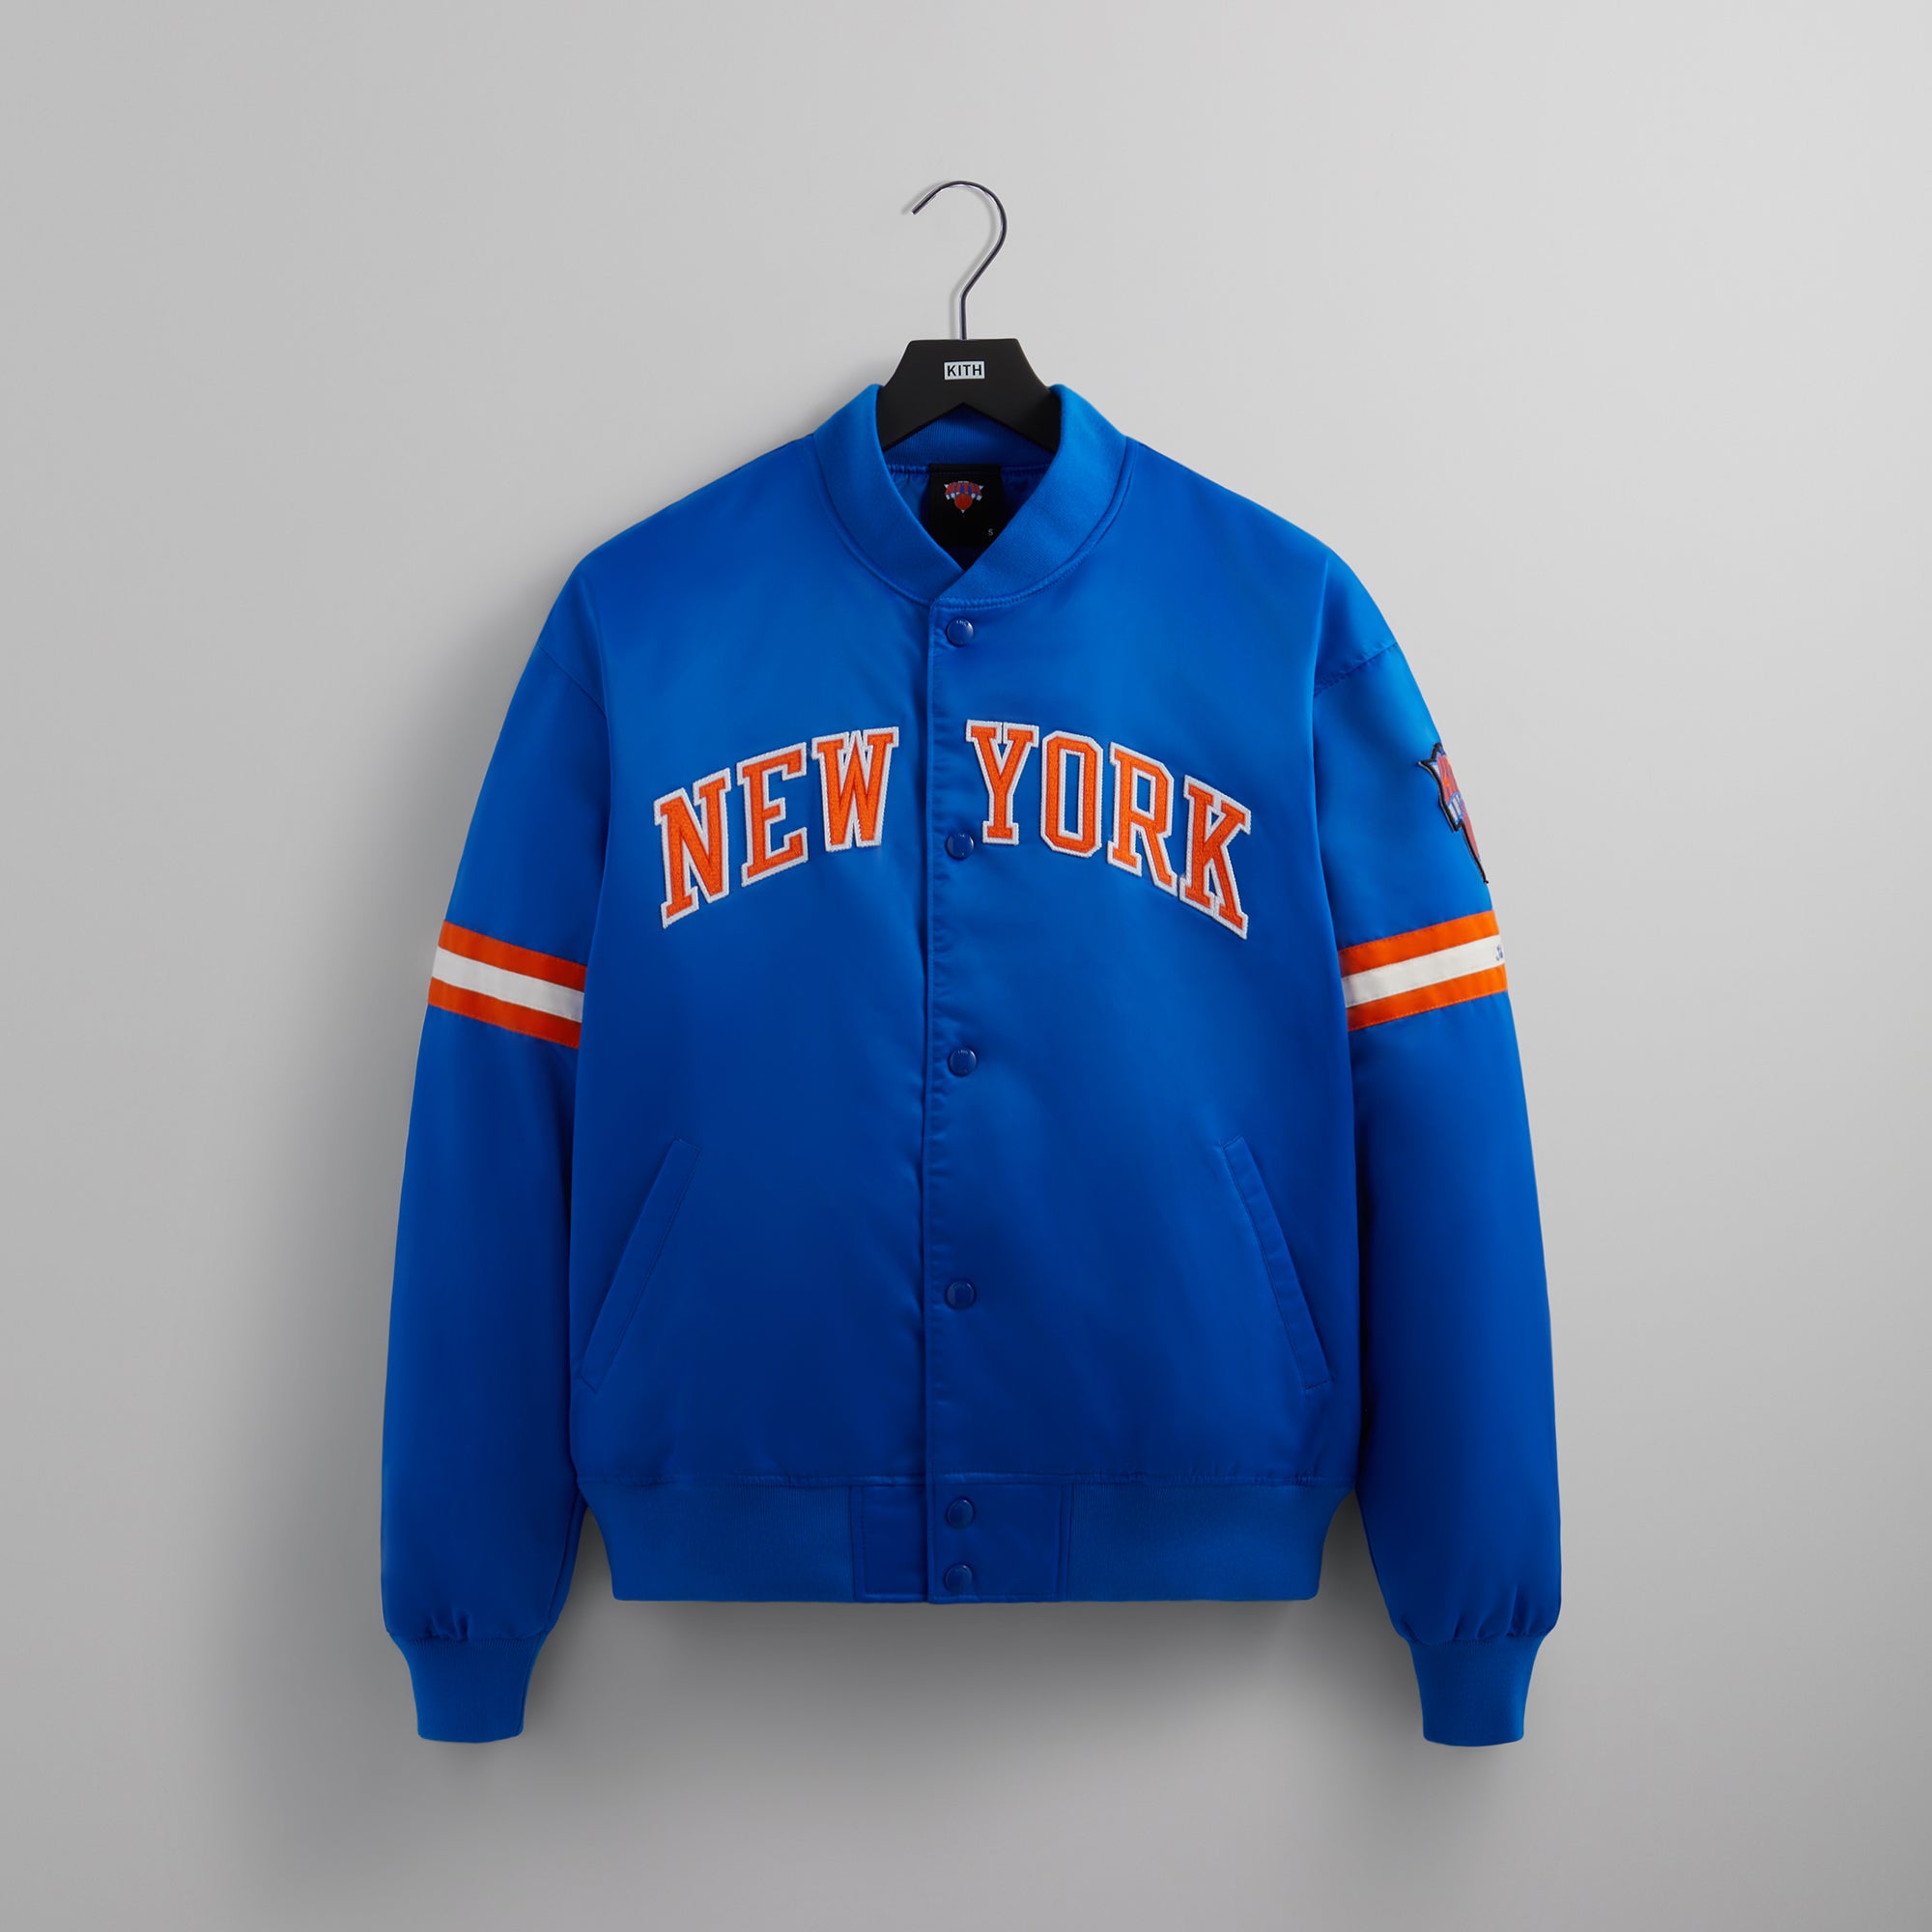 Shopping Discovery: Find & Buy Direct: Kith for New York - SOOK